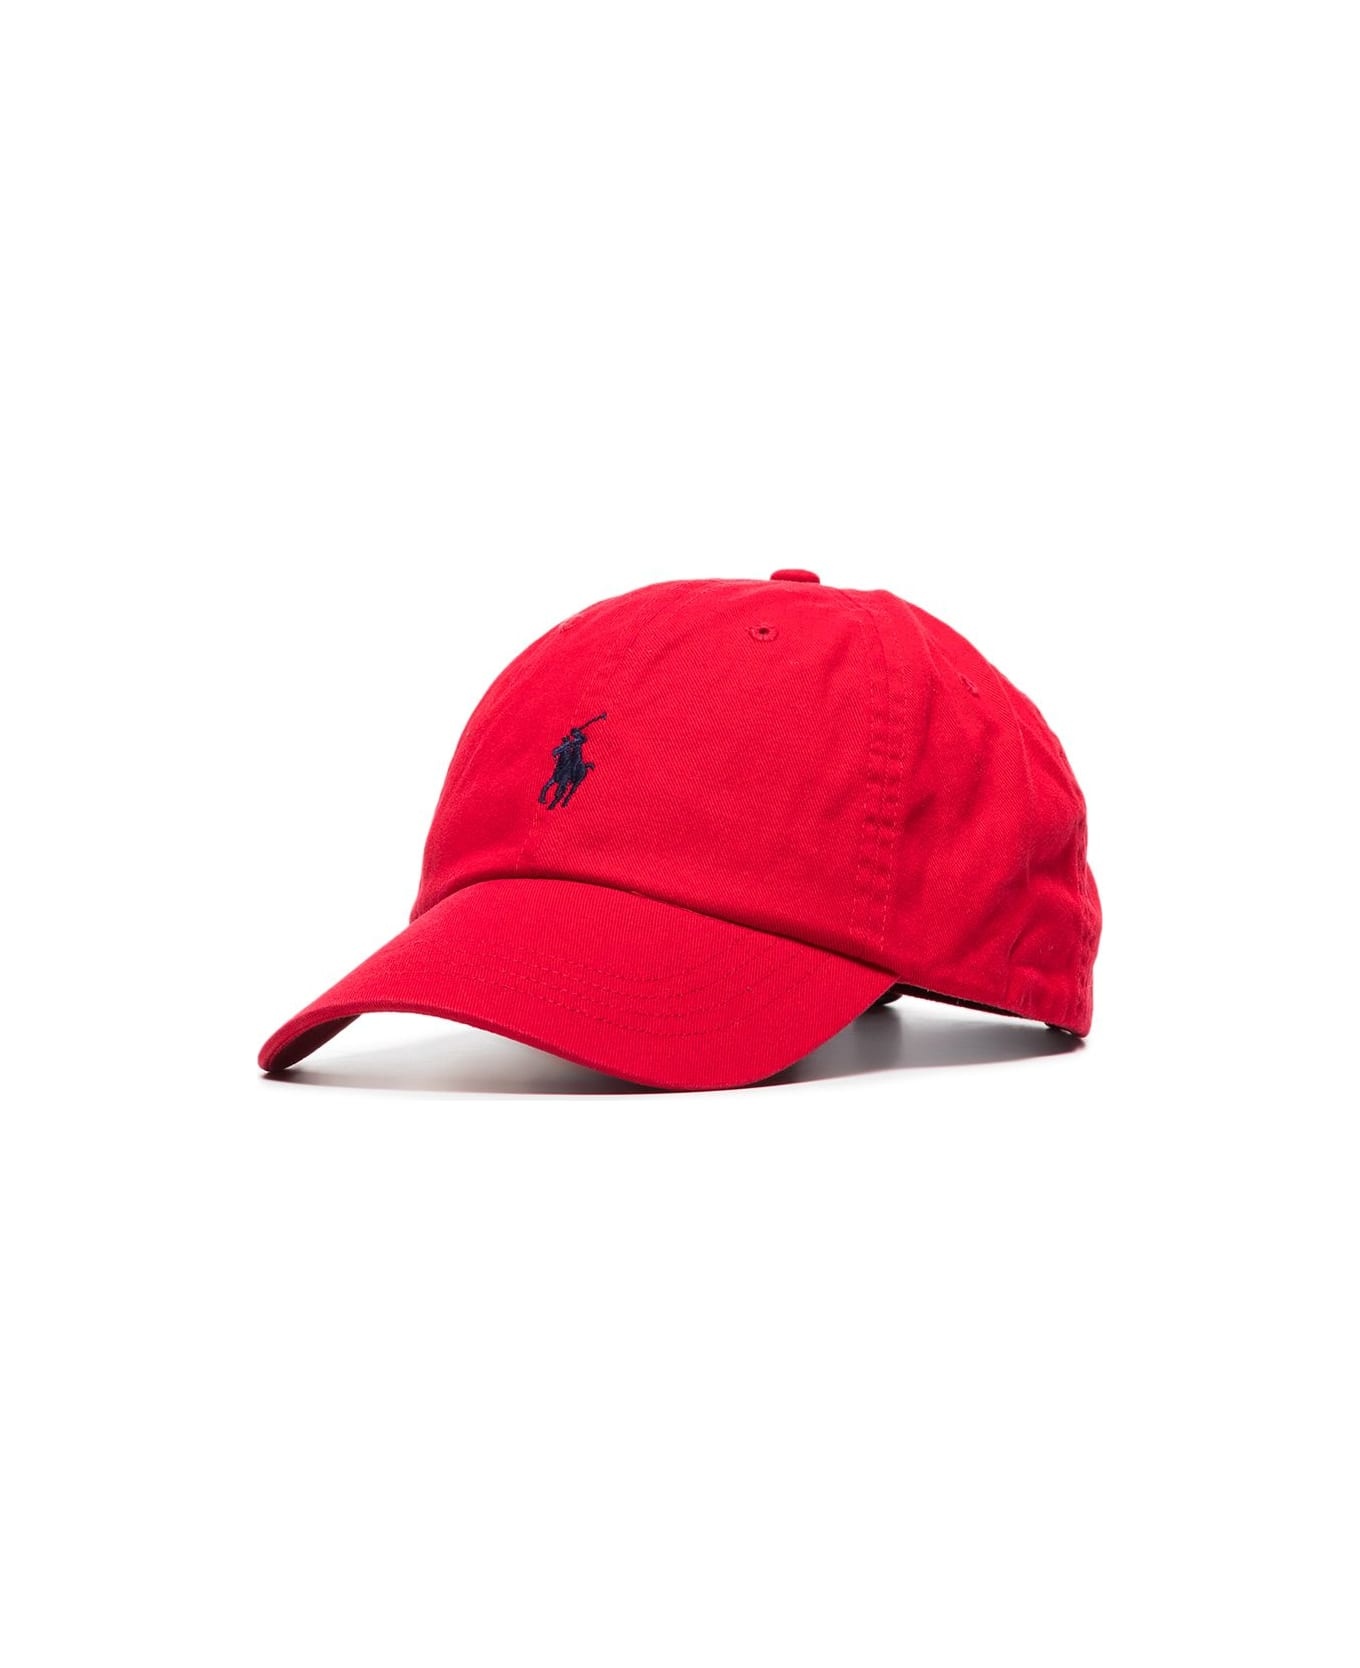 Red Baseball Hat With Blue Pony - 2